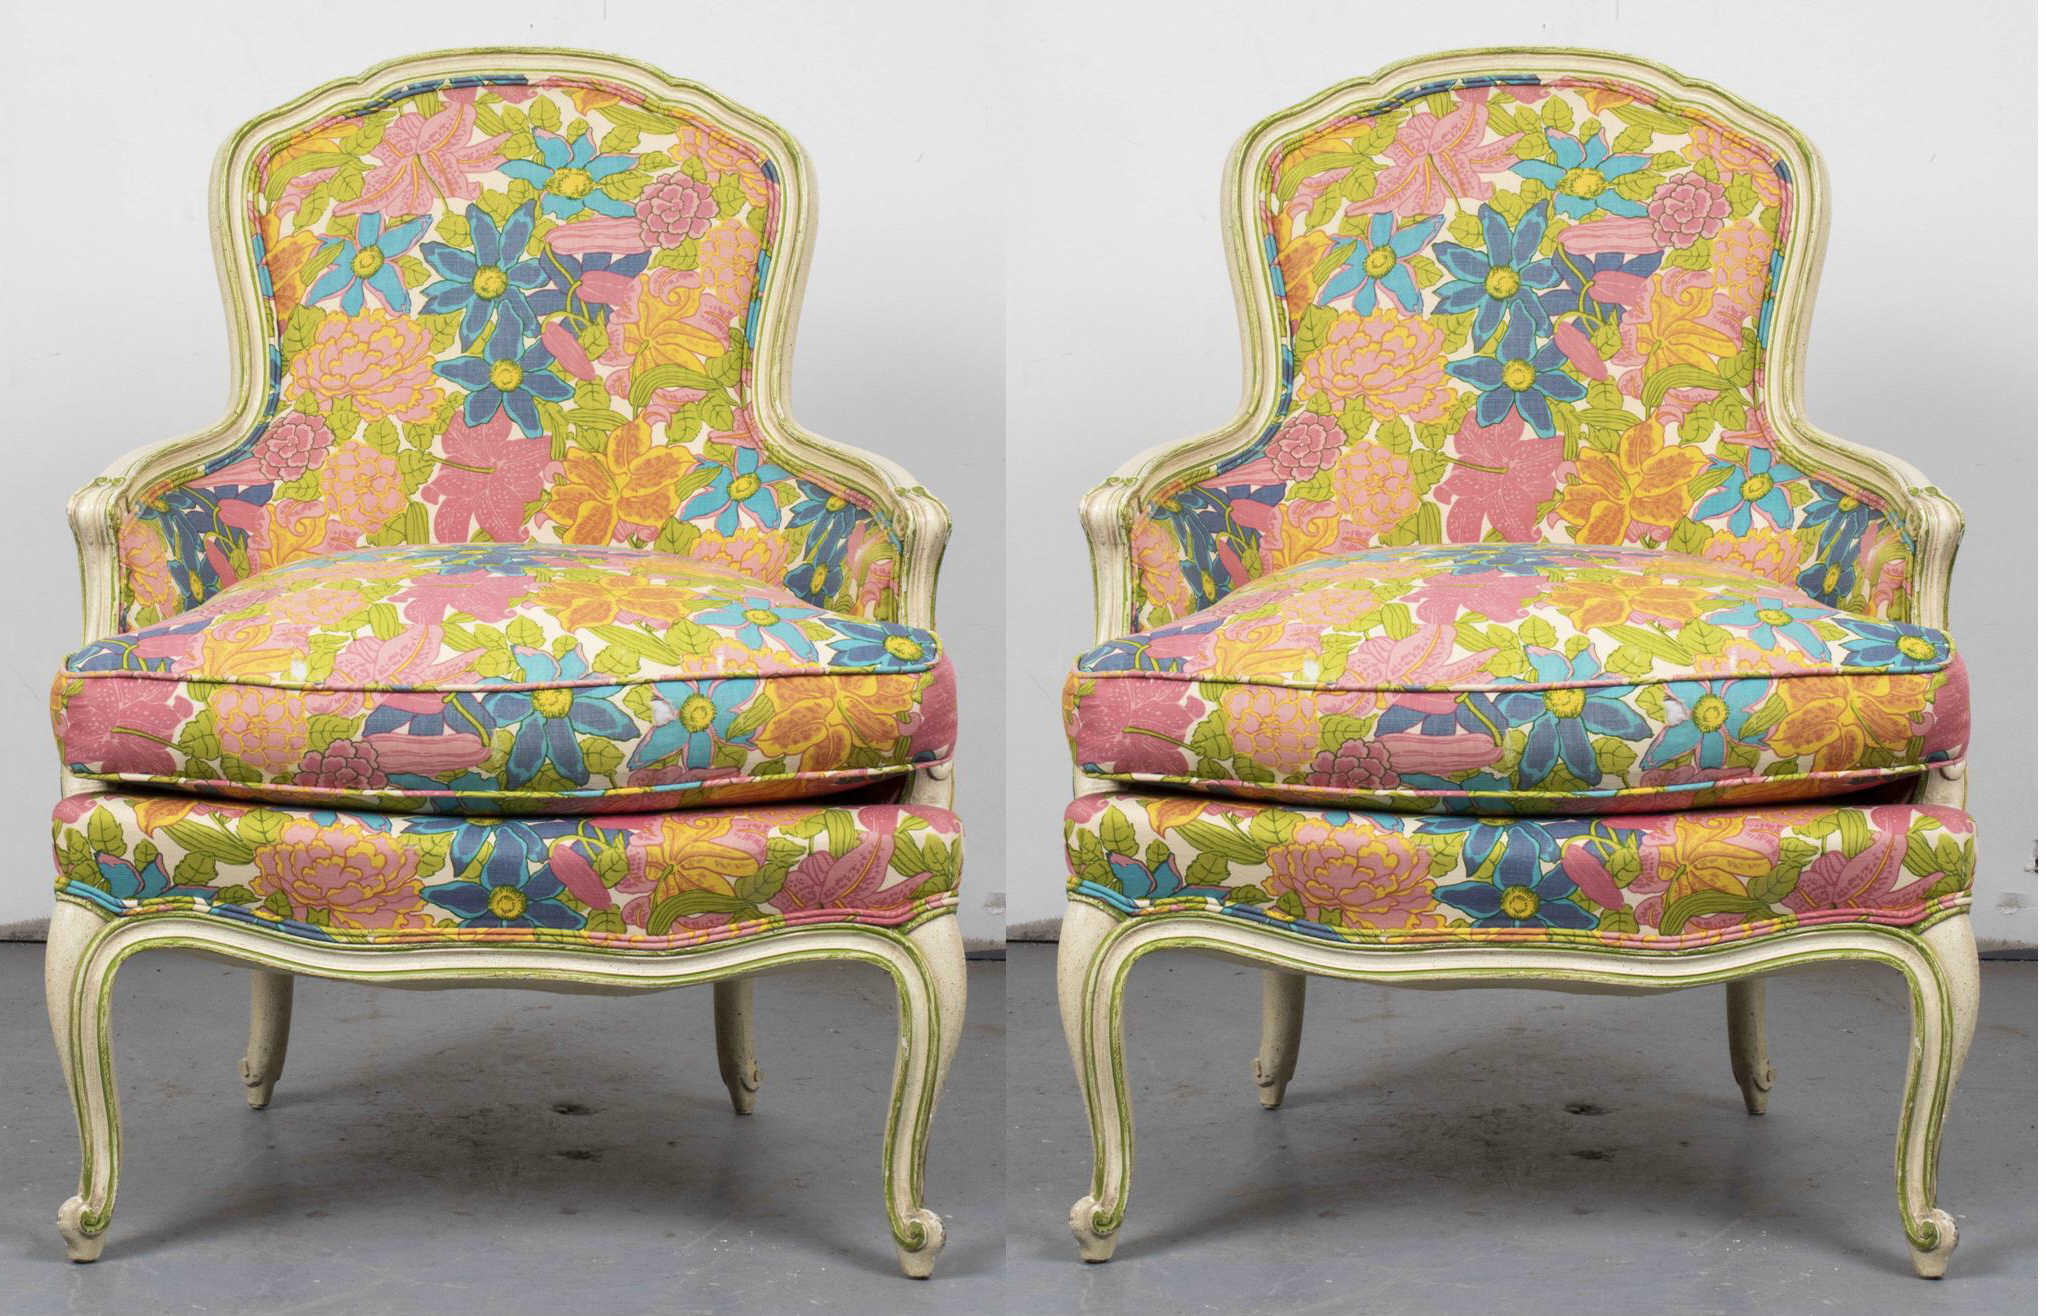 MODERN ROCOCO STYLE UPHOLSTERED 3c4ad7